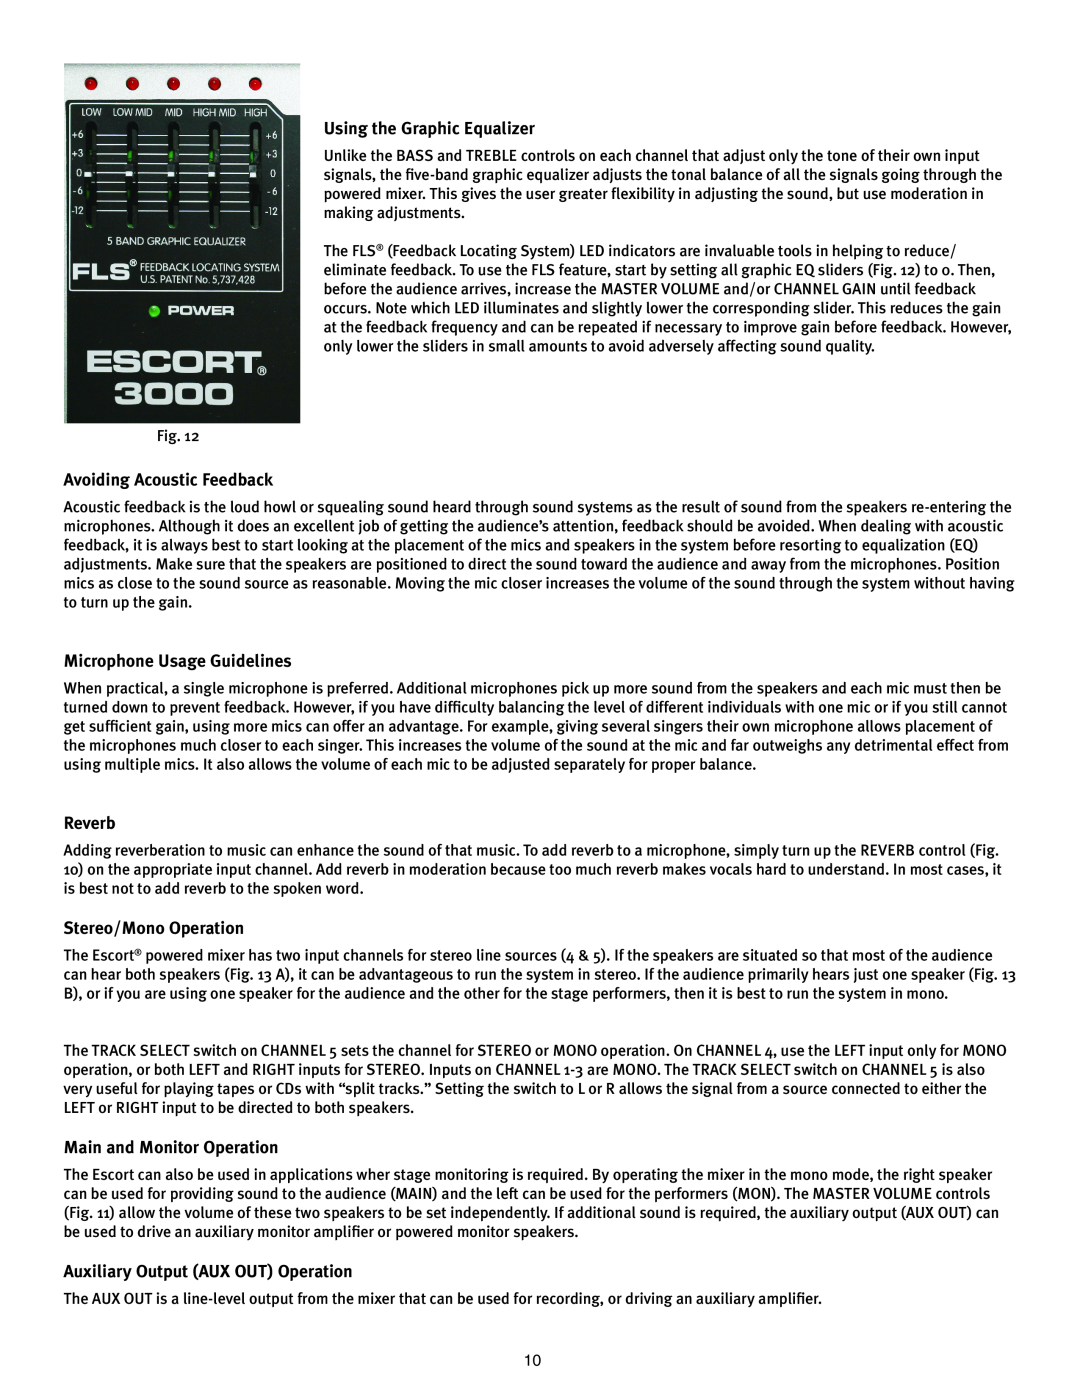 Peavey 3000 manual Using the Graphic Equalizer, Avoiding Acoustic Feedback, Microphone Usage Guidelines, Reverb 